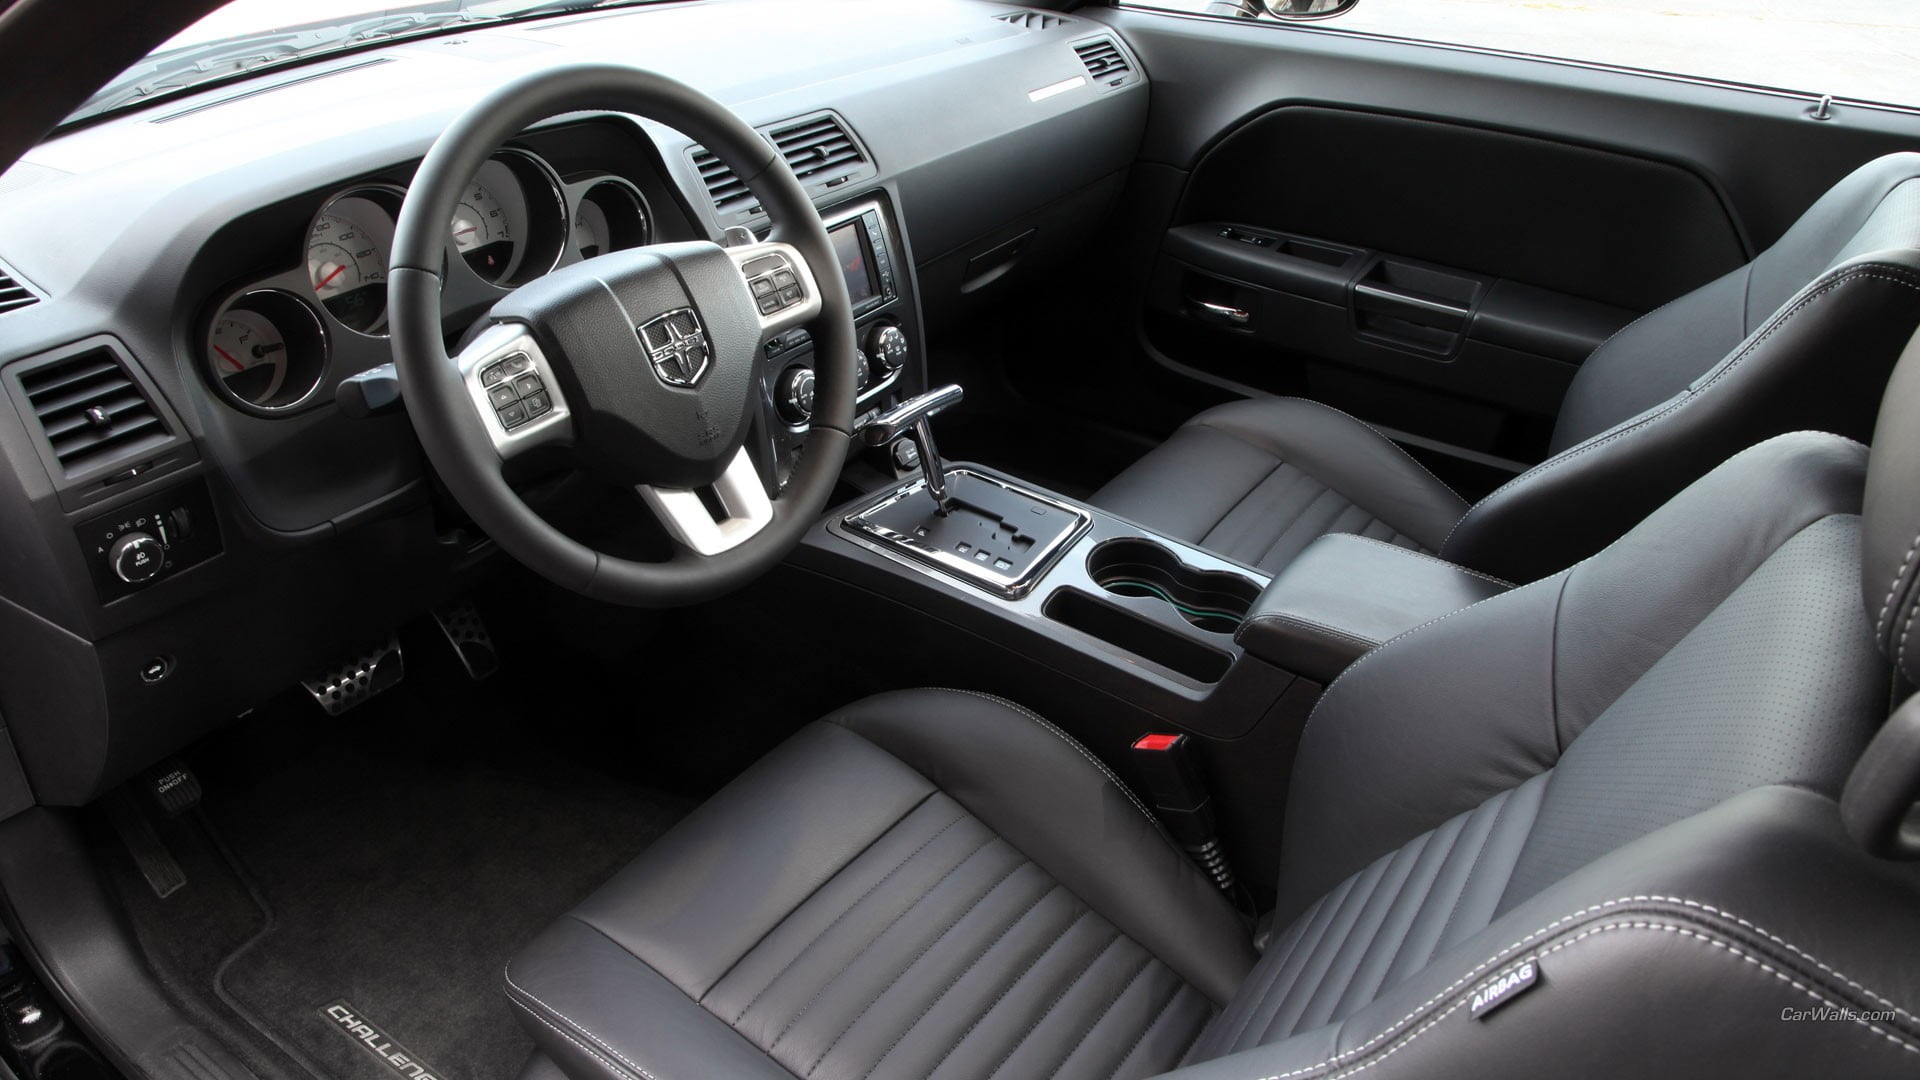 The 2008-2009 Dodge Challenger cars: Interior and features | Allpar Forums